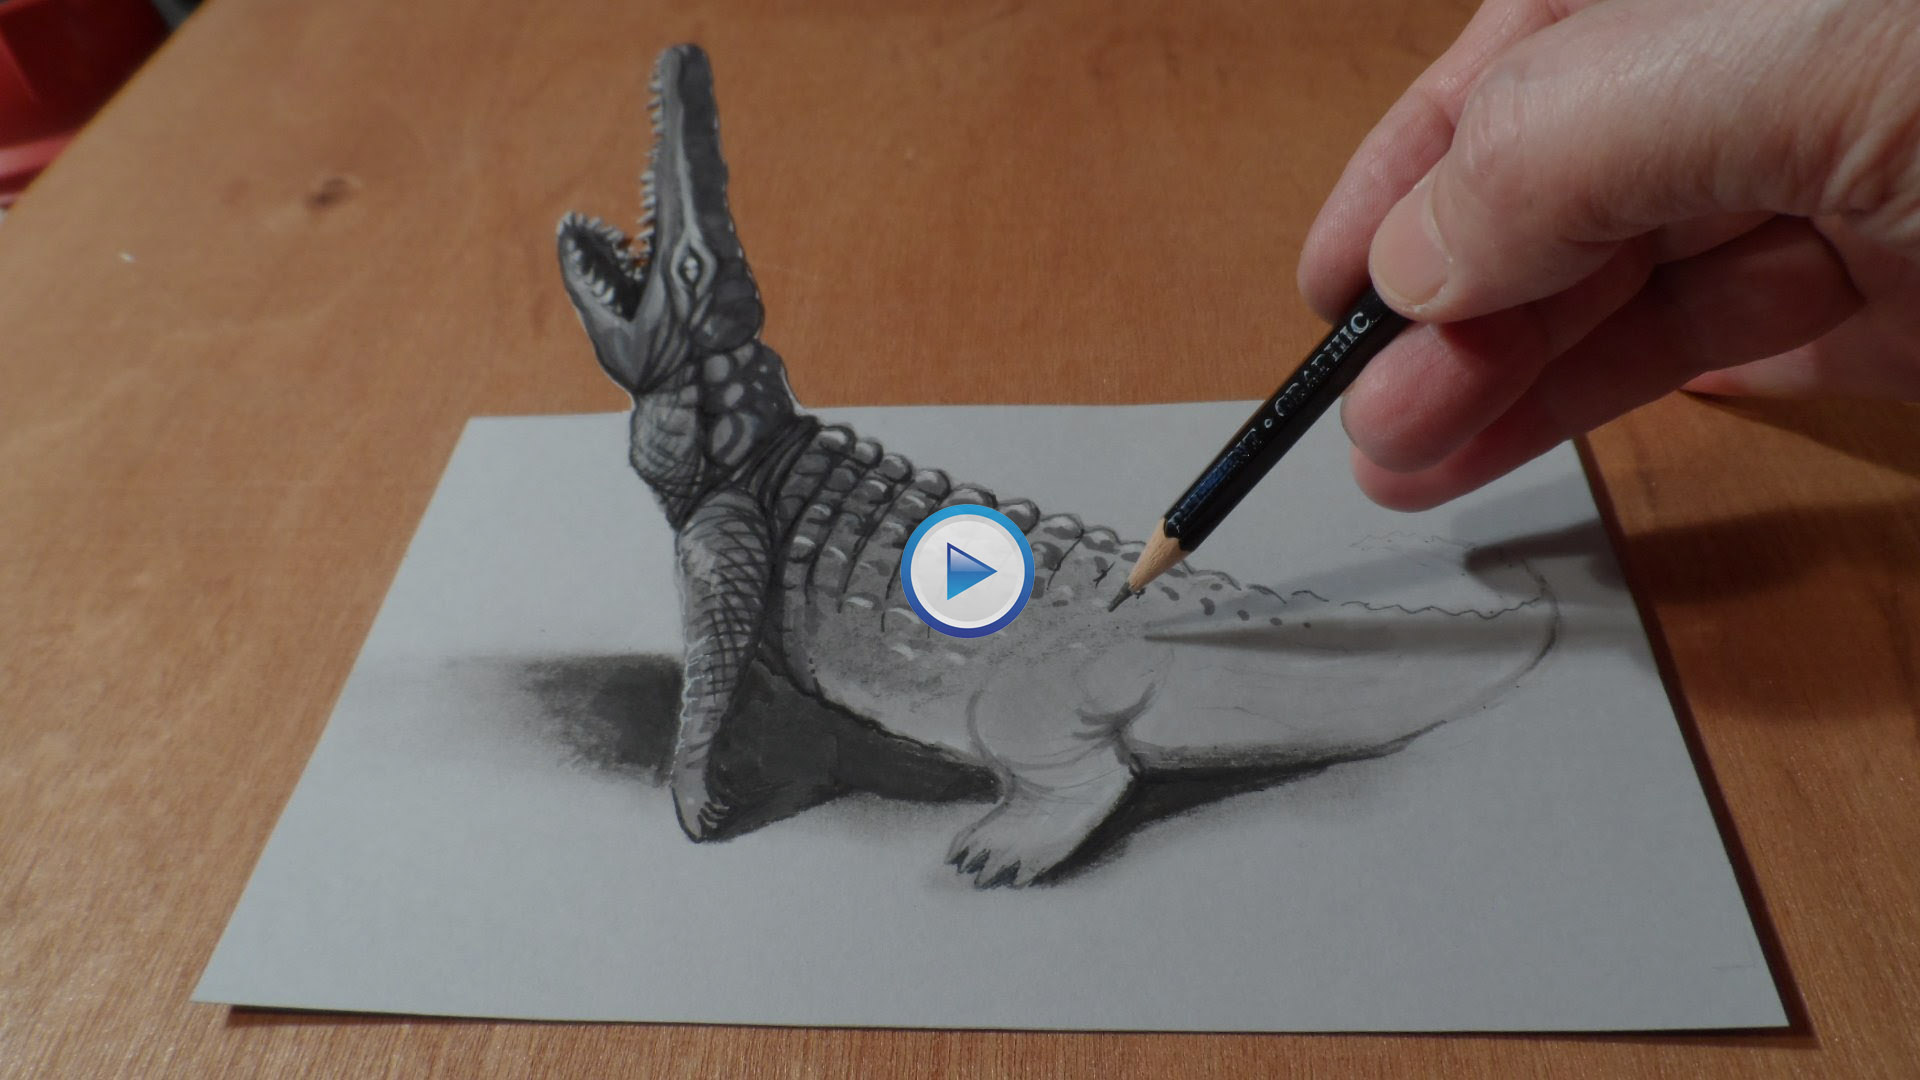 Optical Illusion Art Trick -How to Draw 3D Crocodile Painting Video